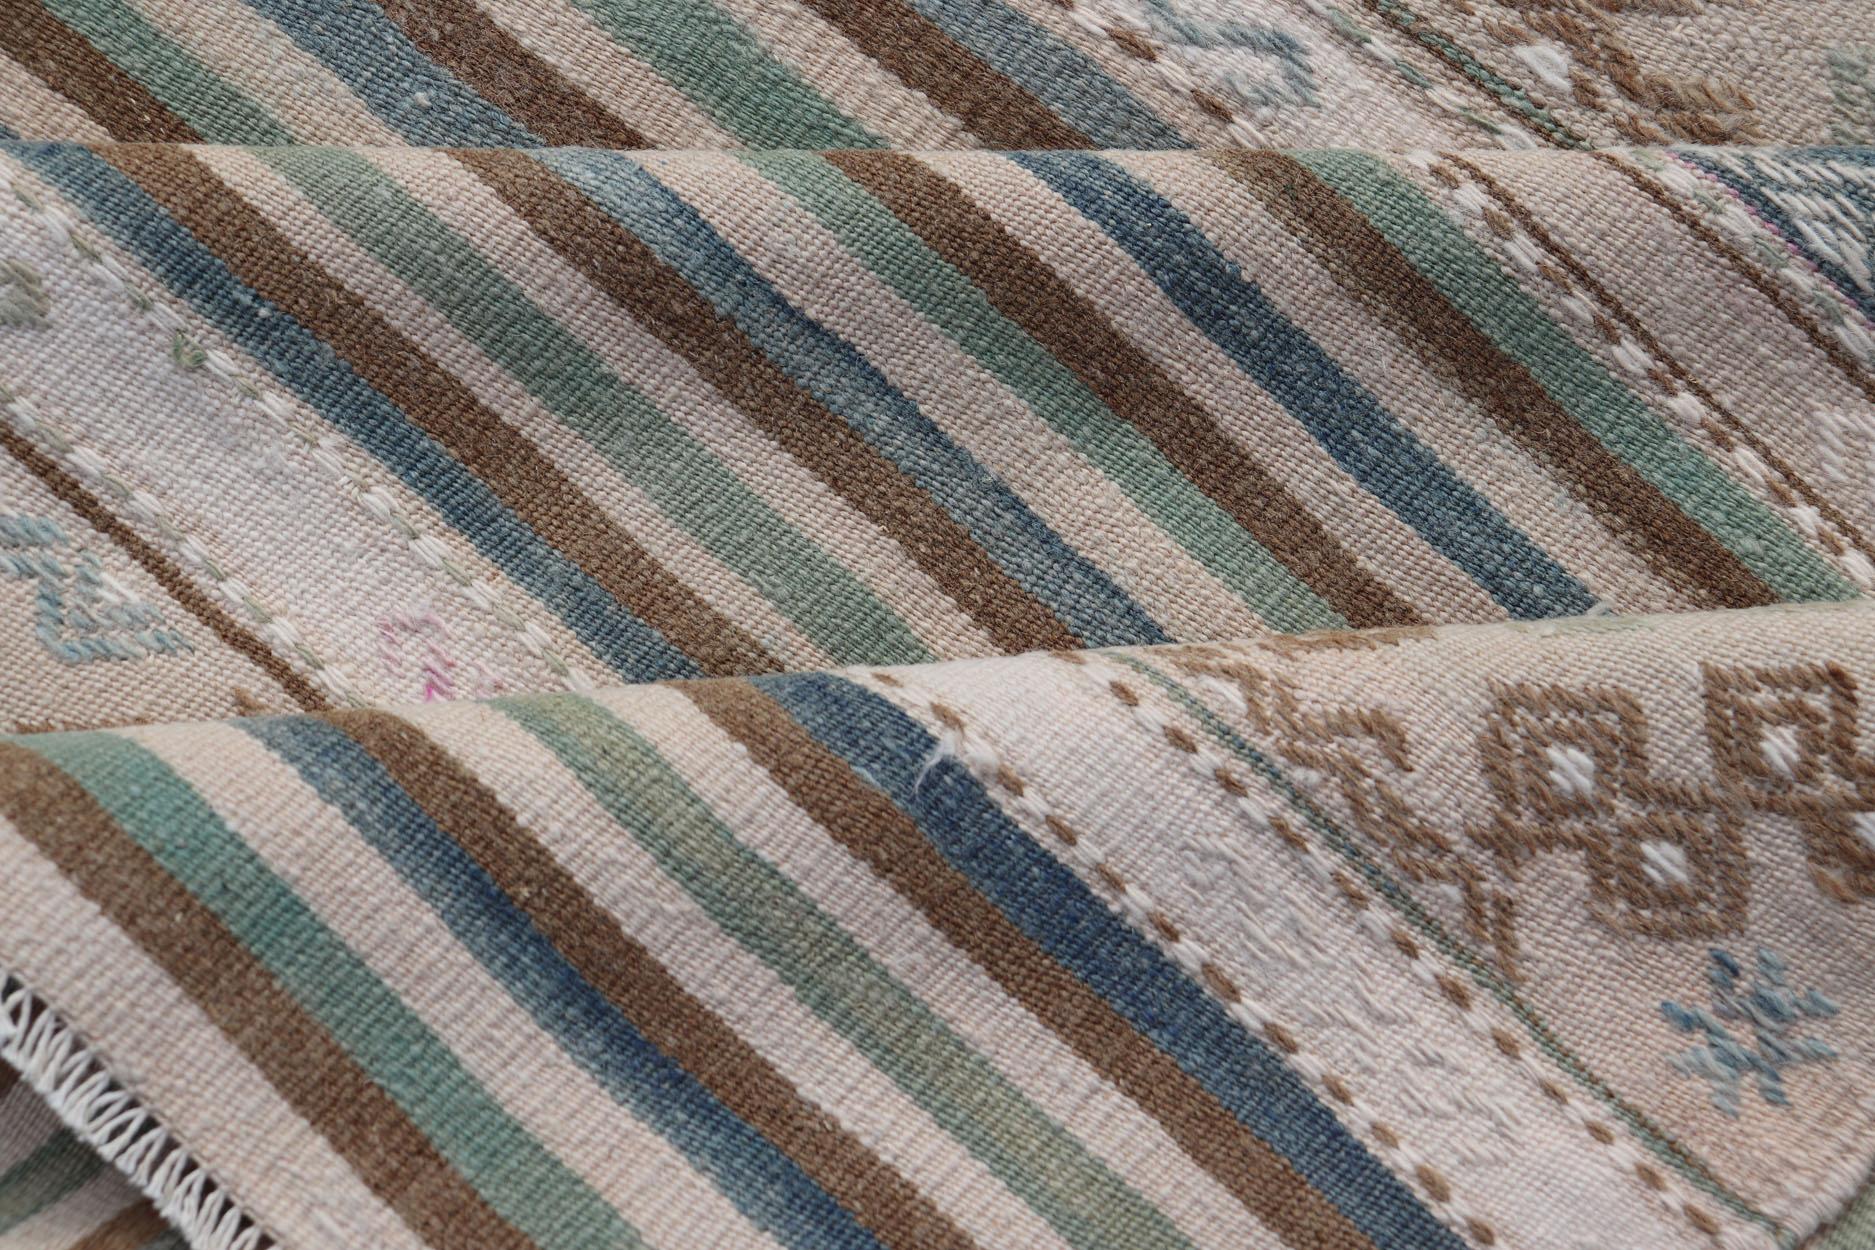 Turkish Flat-Weave Kilim with Stripes and Embroideries In Blue, Green, and Cream For Sale 4